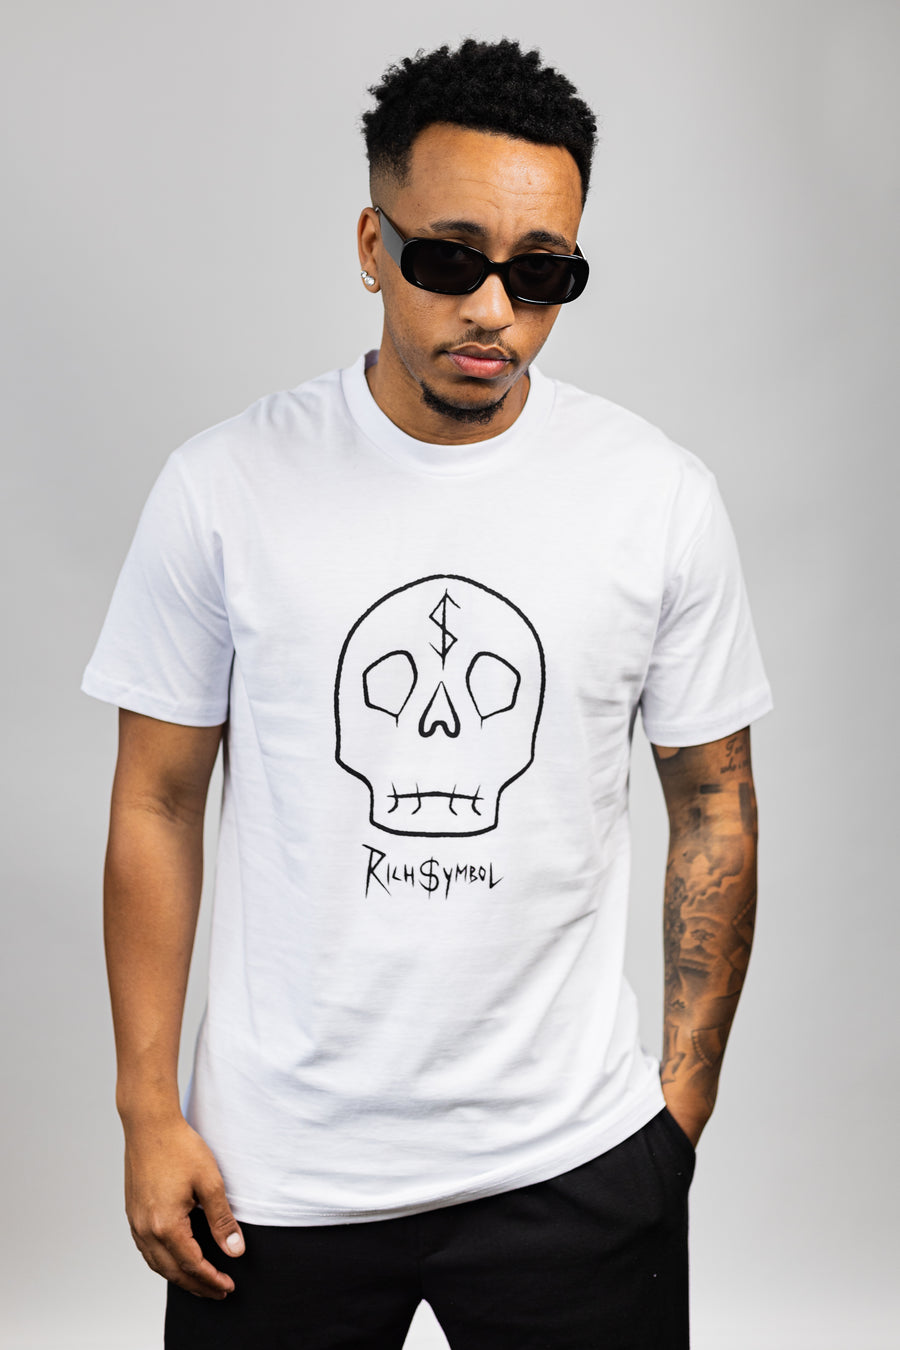 MADE FOR KINGS T-SHIRT